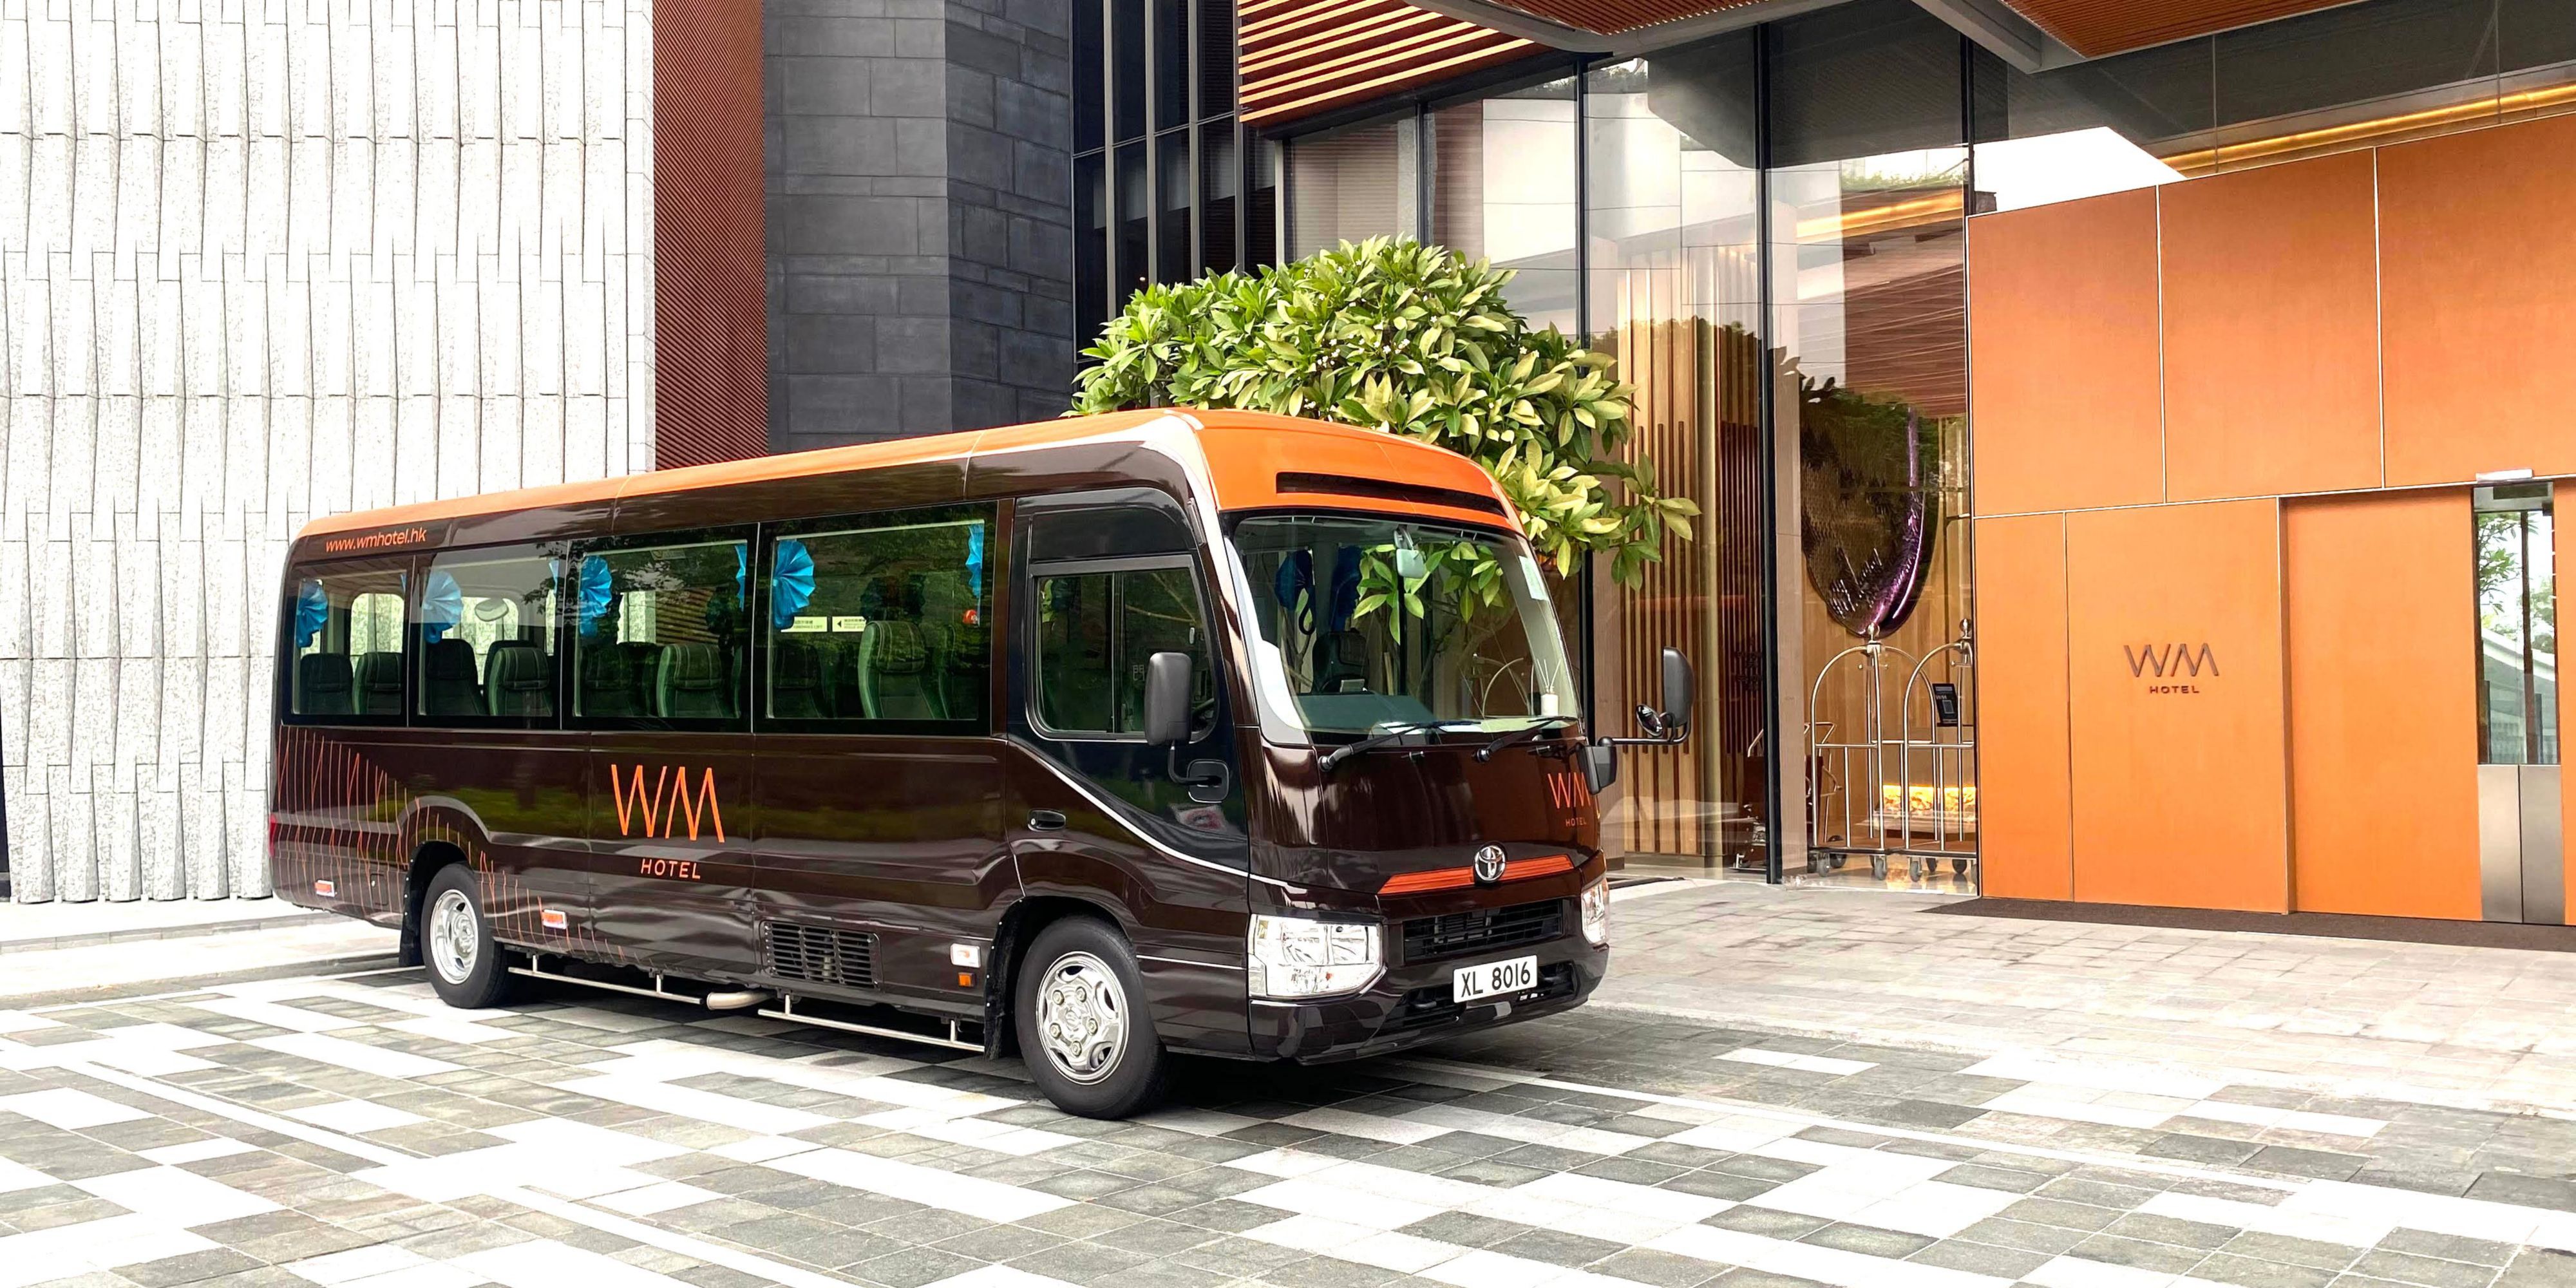 Complimentary Shuttle Bus Service between WM Hotel Hong Kong, Vignette Collection and MTR Hang Hau Station. Each journey takes approximately 30 minutes, and actual time is subject to change due to traffic conditions. Seats are limited and exclusive for hotel-registered guests, and only hand-carried baggage is allowed. Pet dogs are not permitted.